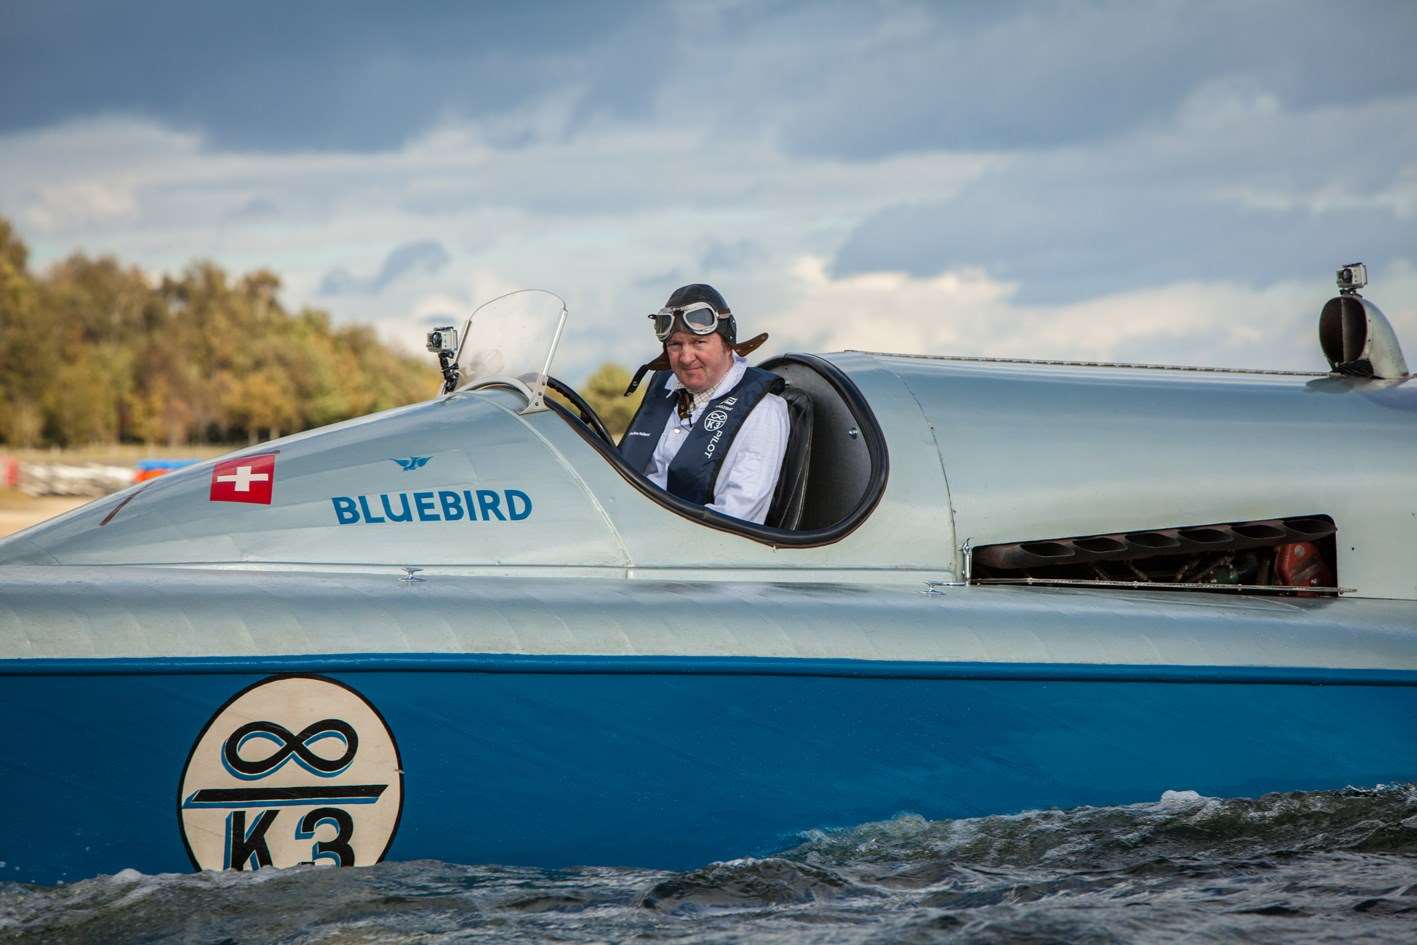 Karl Foulkes-Halbard in the world-record breaking craft Bluebird K3, once owned by Sir Malcolm Campbell